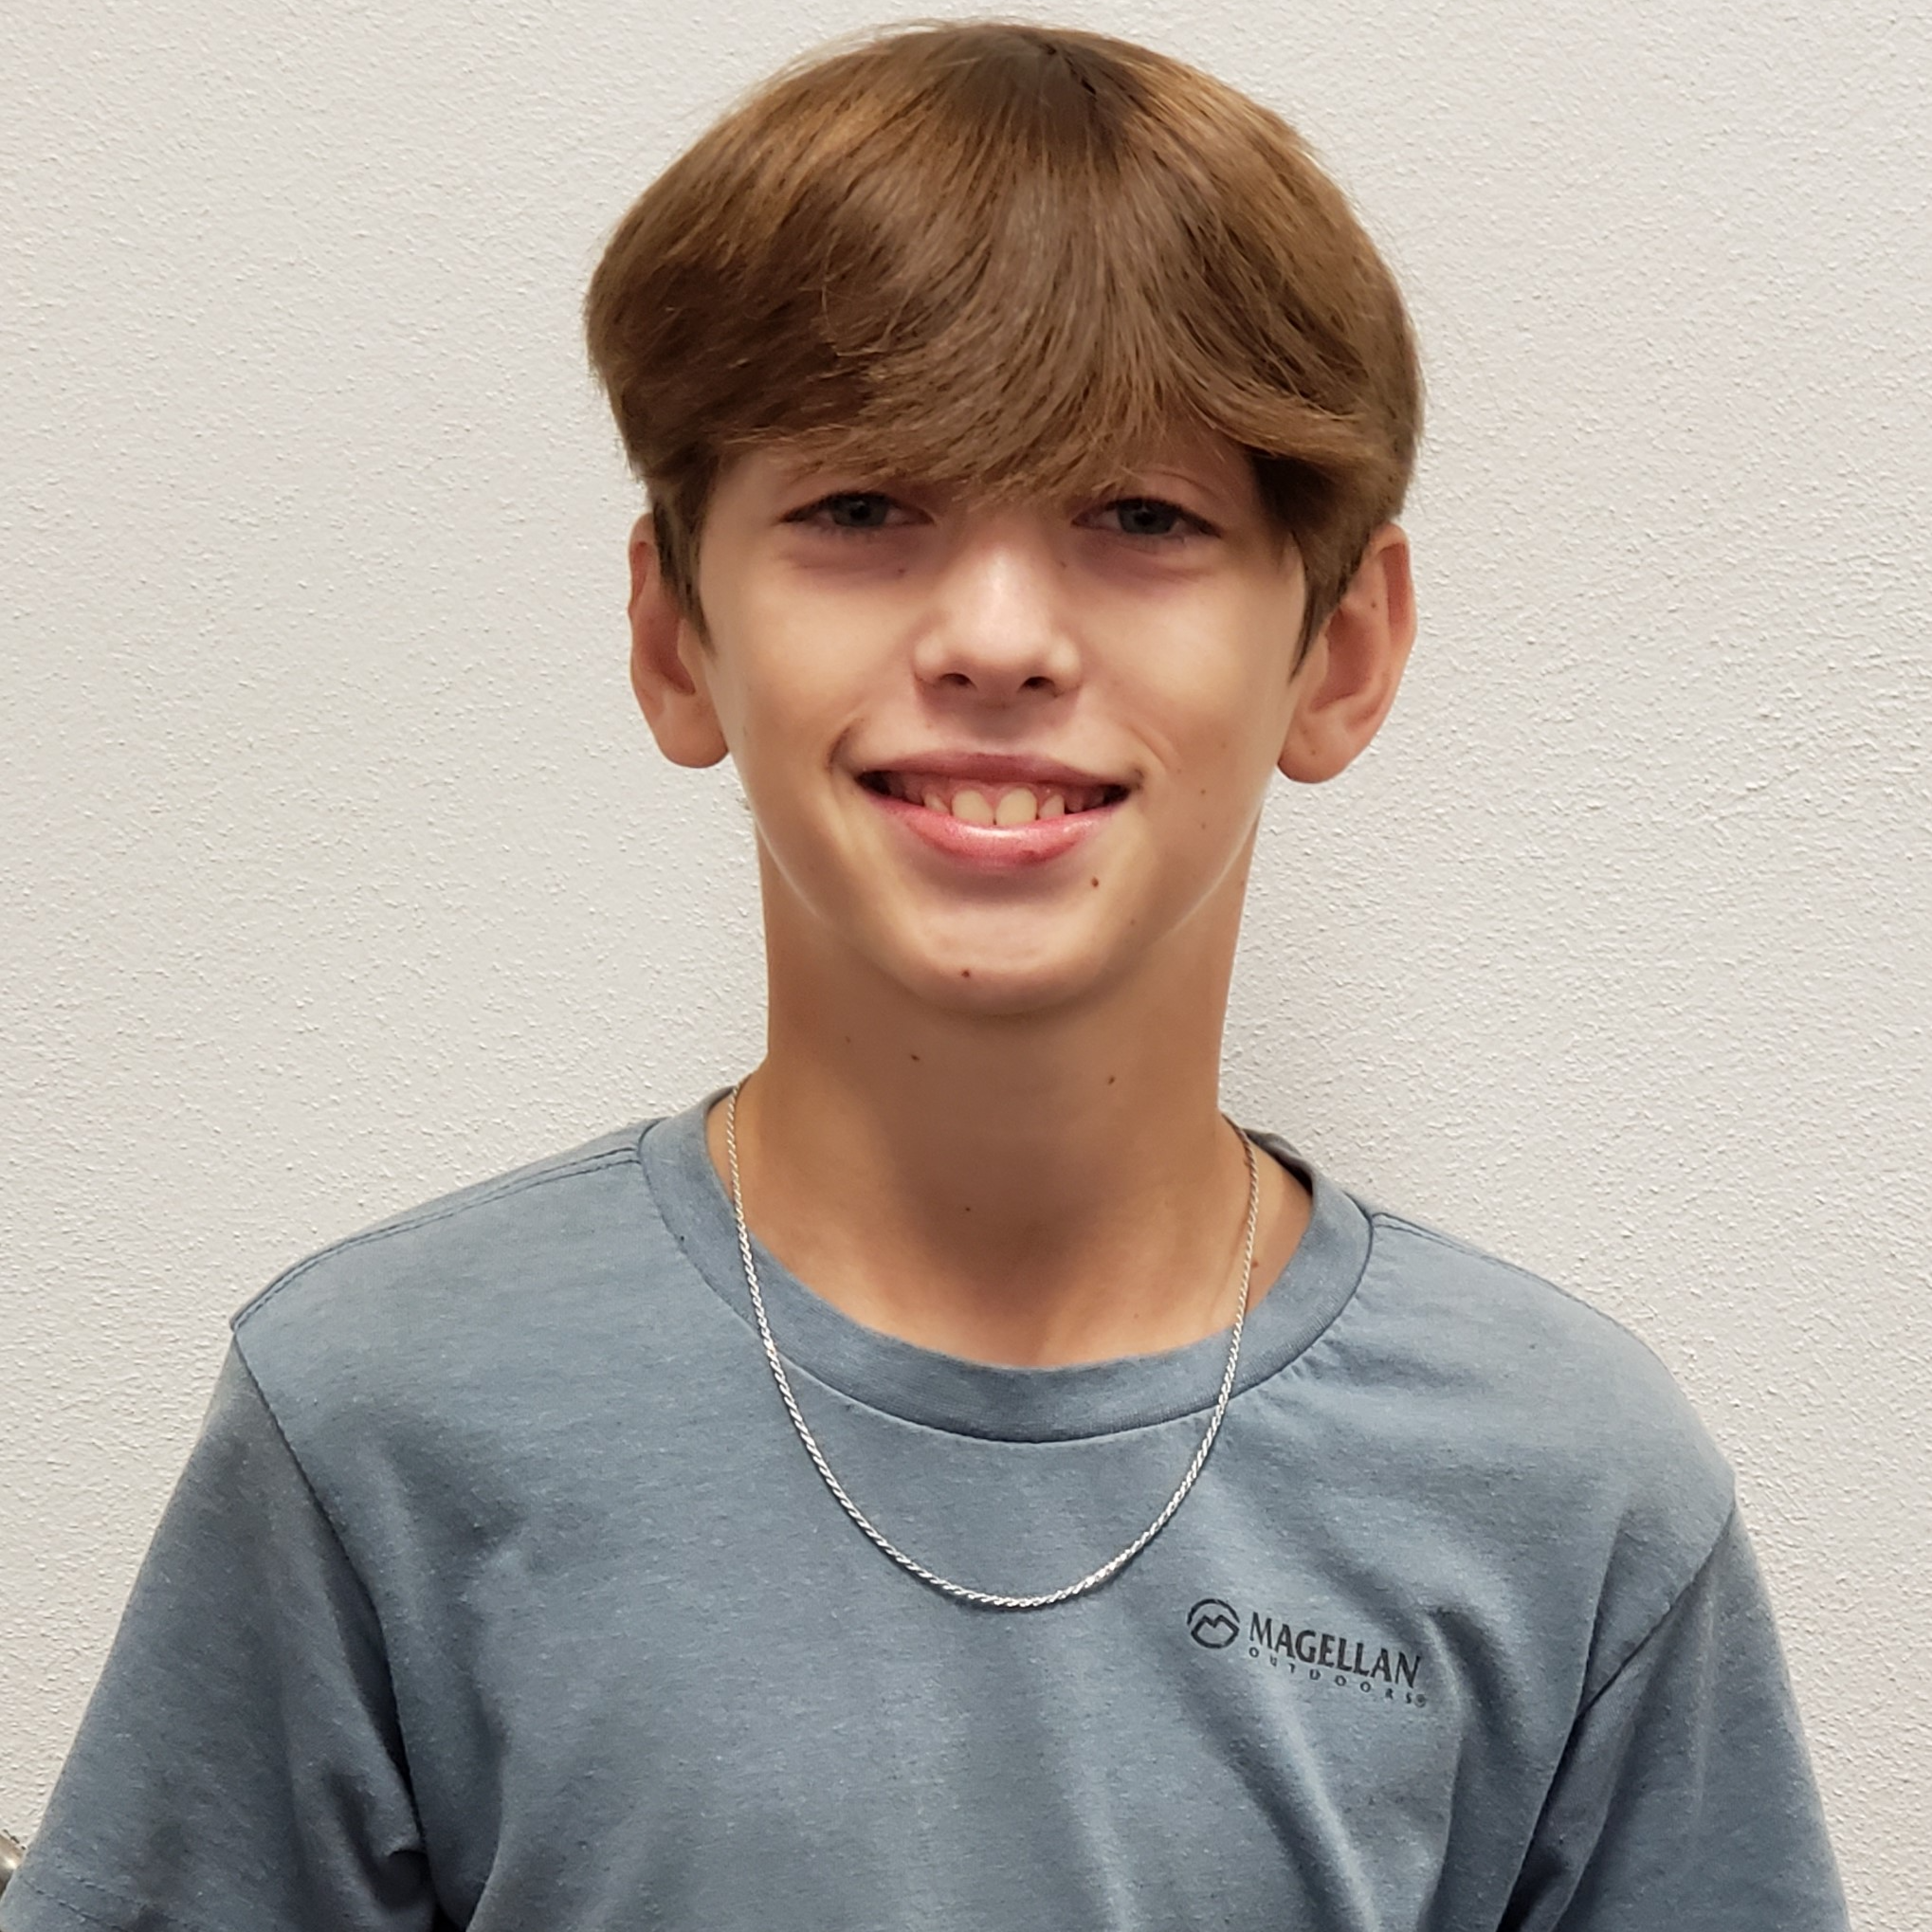 smiling boy with brown hair wearing a gray t-shirt